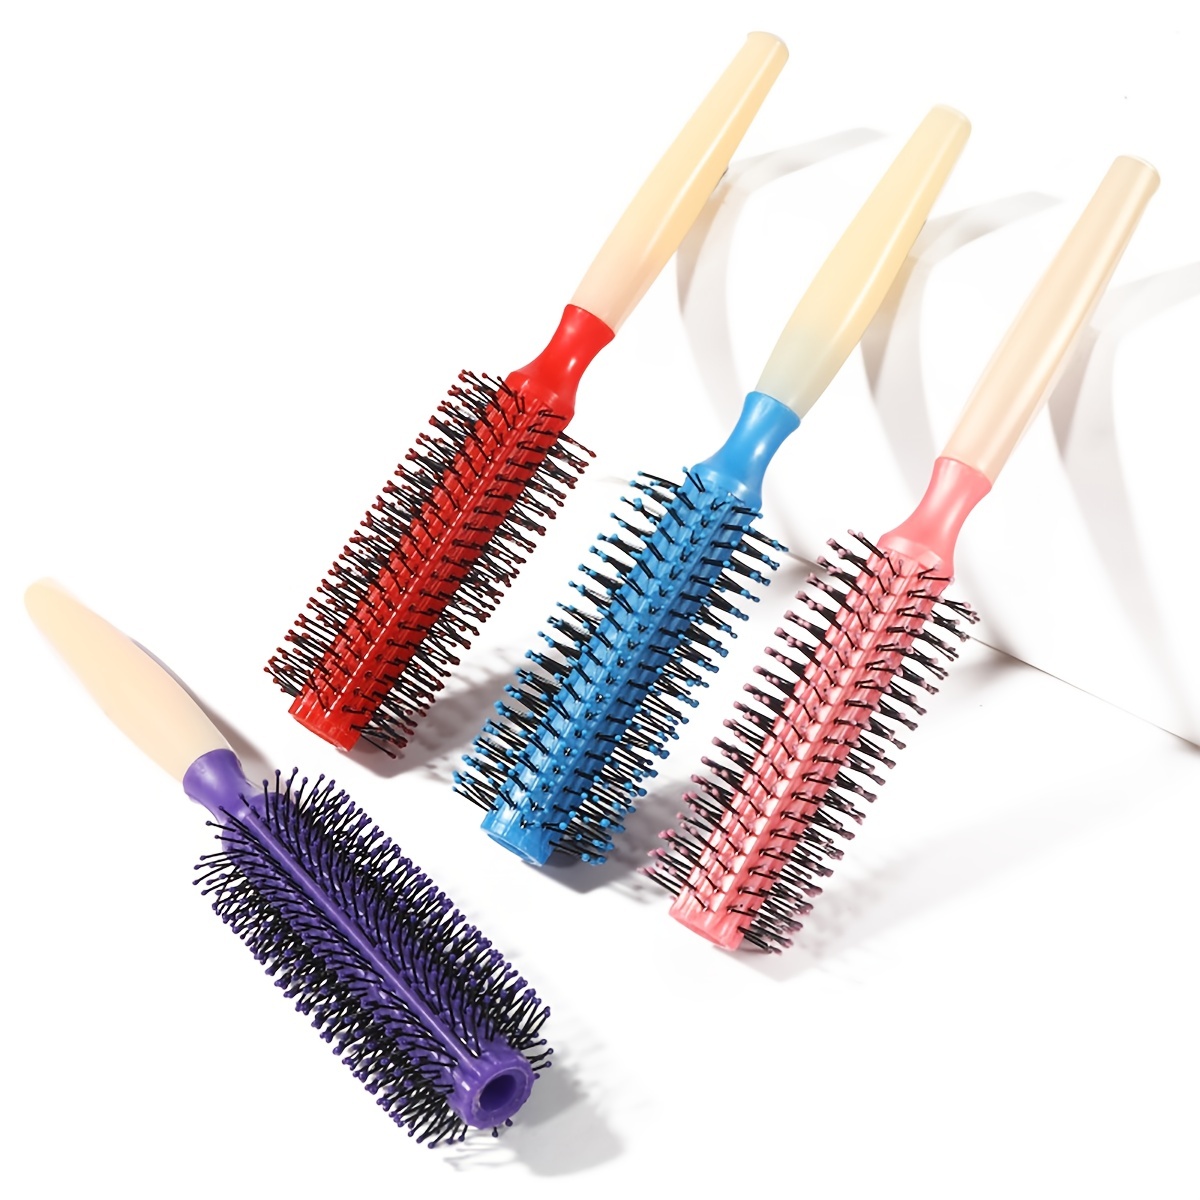  FRCOLOR 6pcs Comb Cleaner Hair Brush Cleaner Solution Hair  Comb Hair Brush Cleaner Tool Shape Hair Brush Cleaning Tool Brushes for  Curly Hair Cleaning Brushes Curls Curling Comb Nylon 